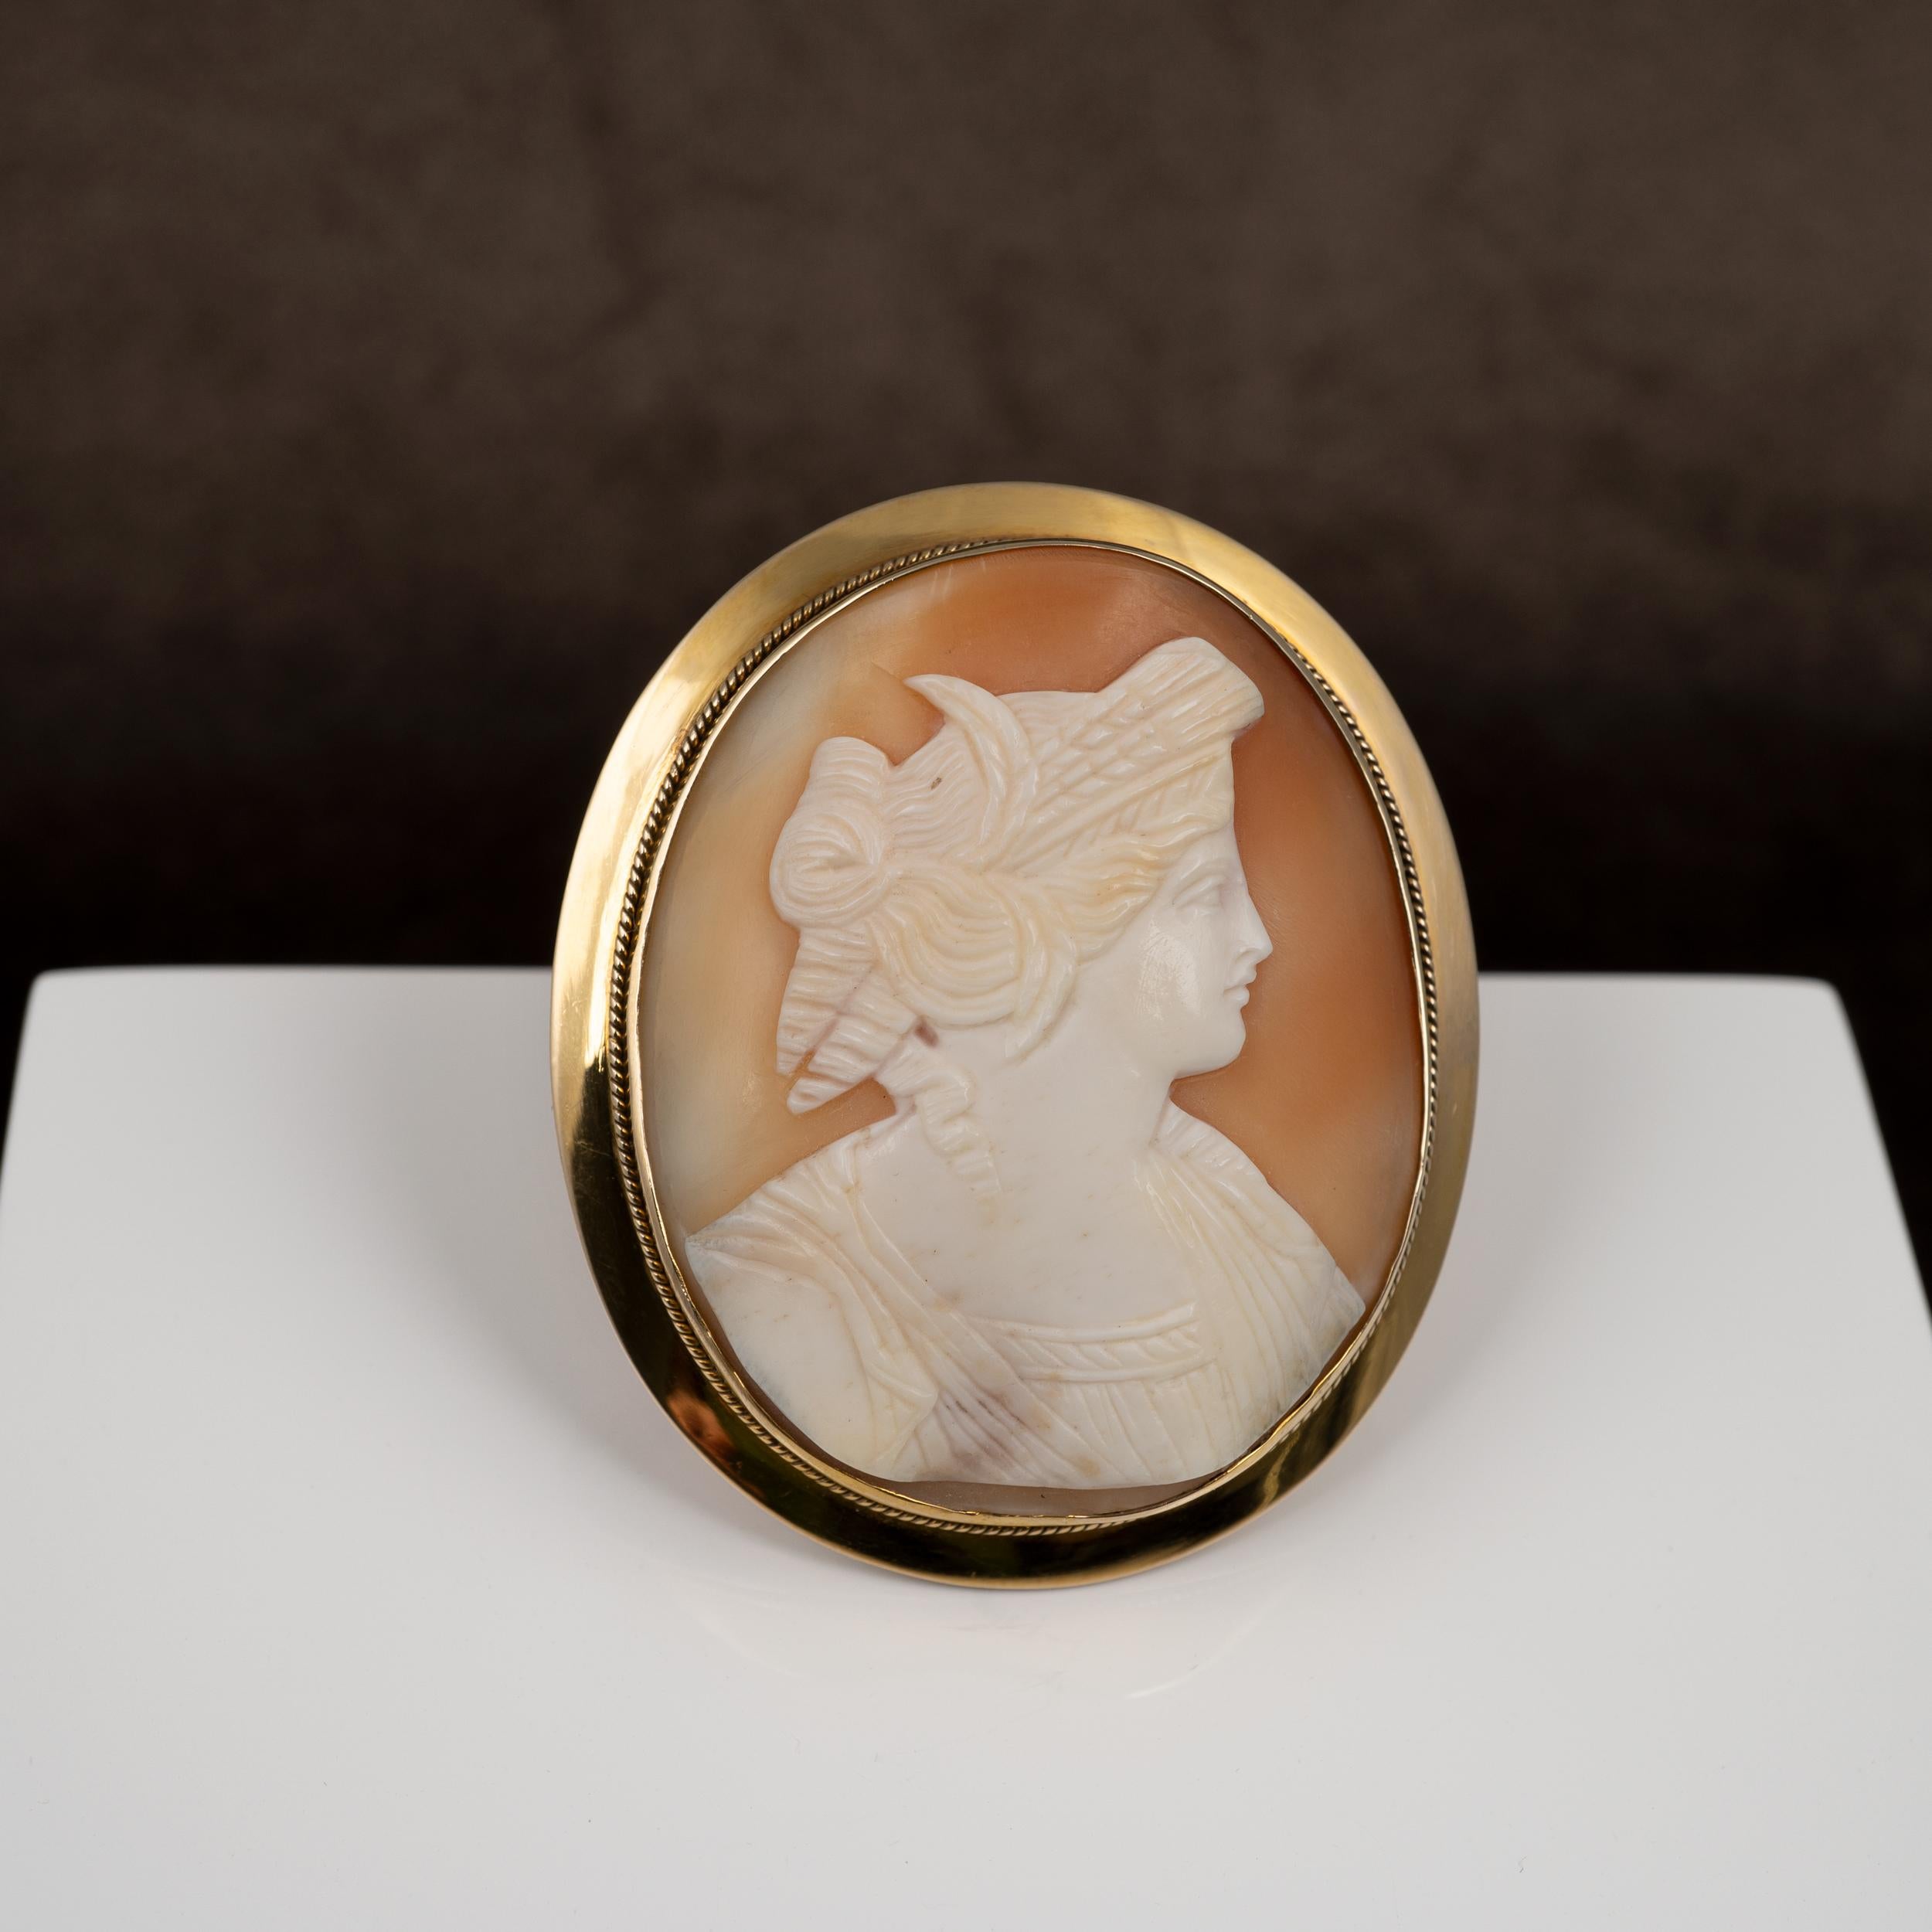 Gold-mounted Carnelian shell carved cameo brooch, depicting a Greek goddess wearing robe and feathers in hair. Circa 1960s
This timeless and classical cameo is offered in very good condition. The pin is firm and springy and slots neatly into a